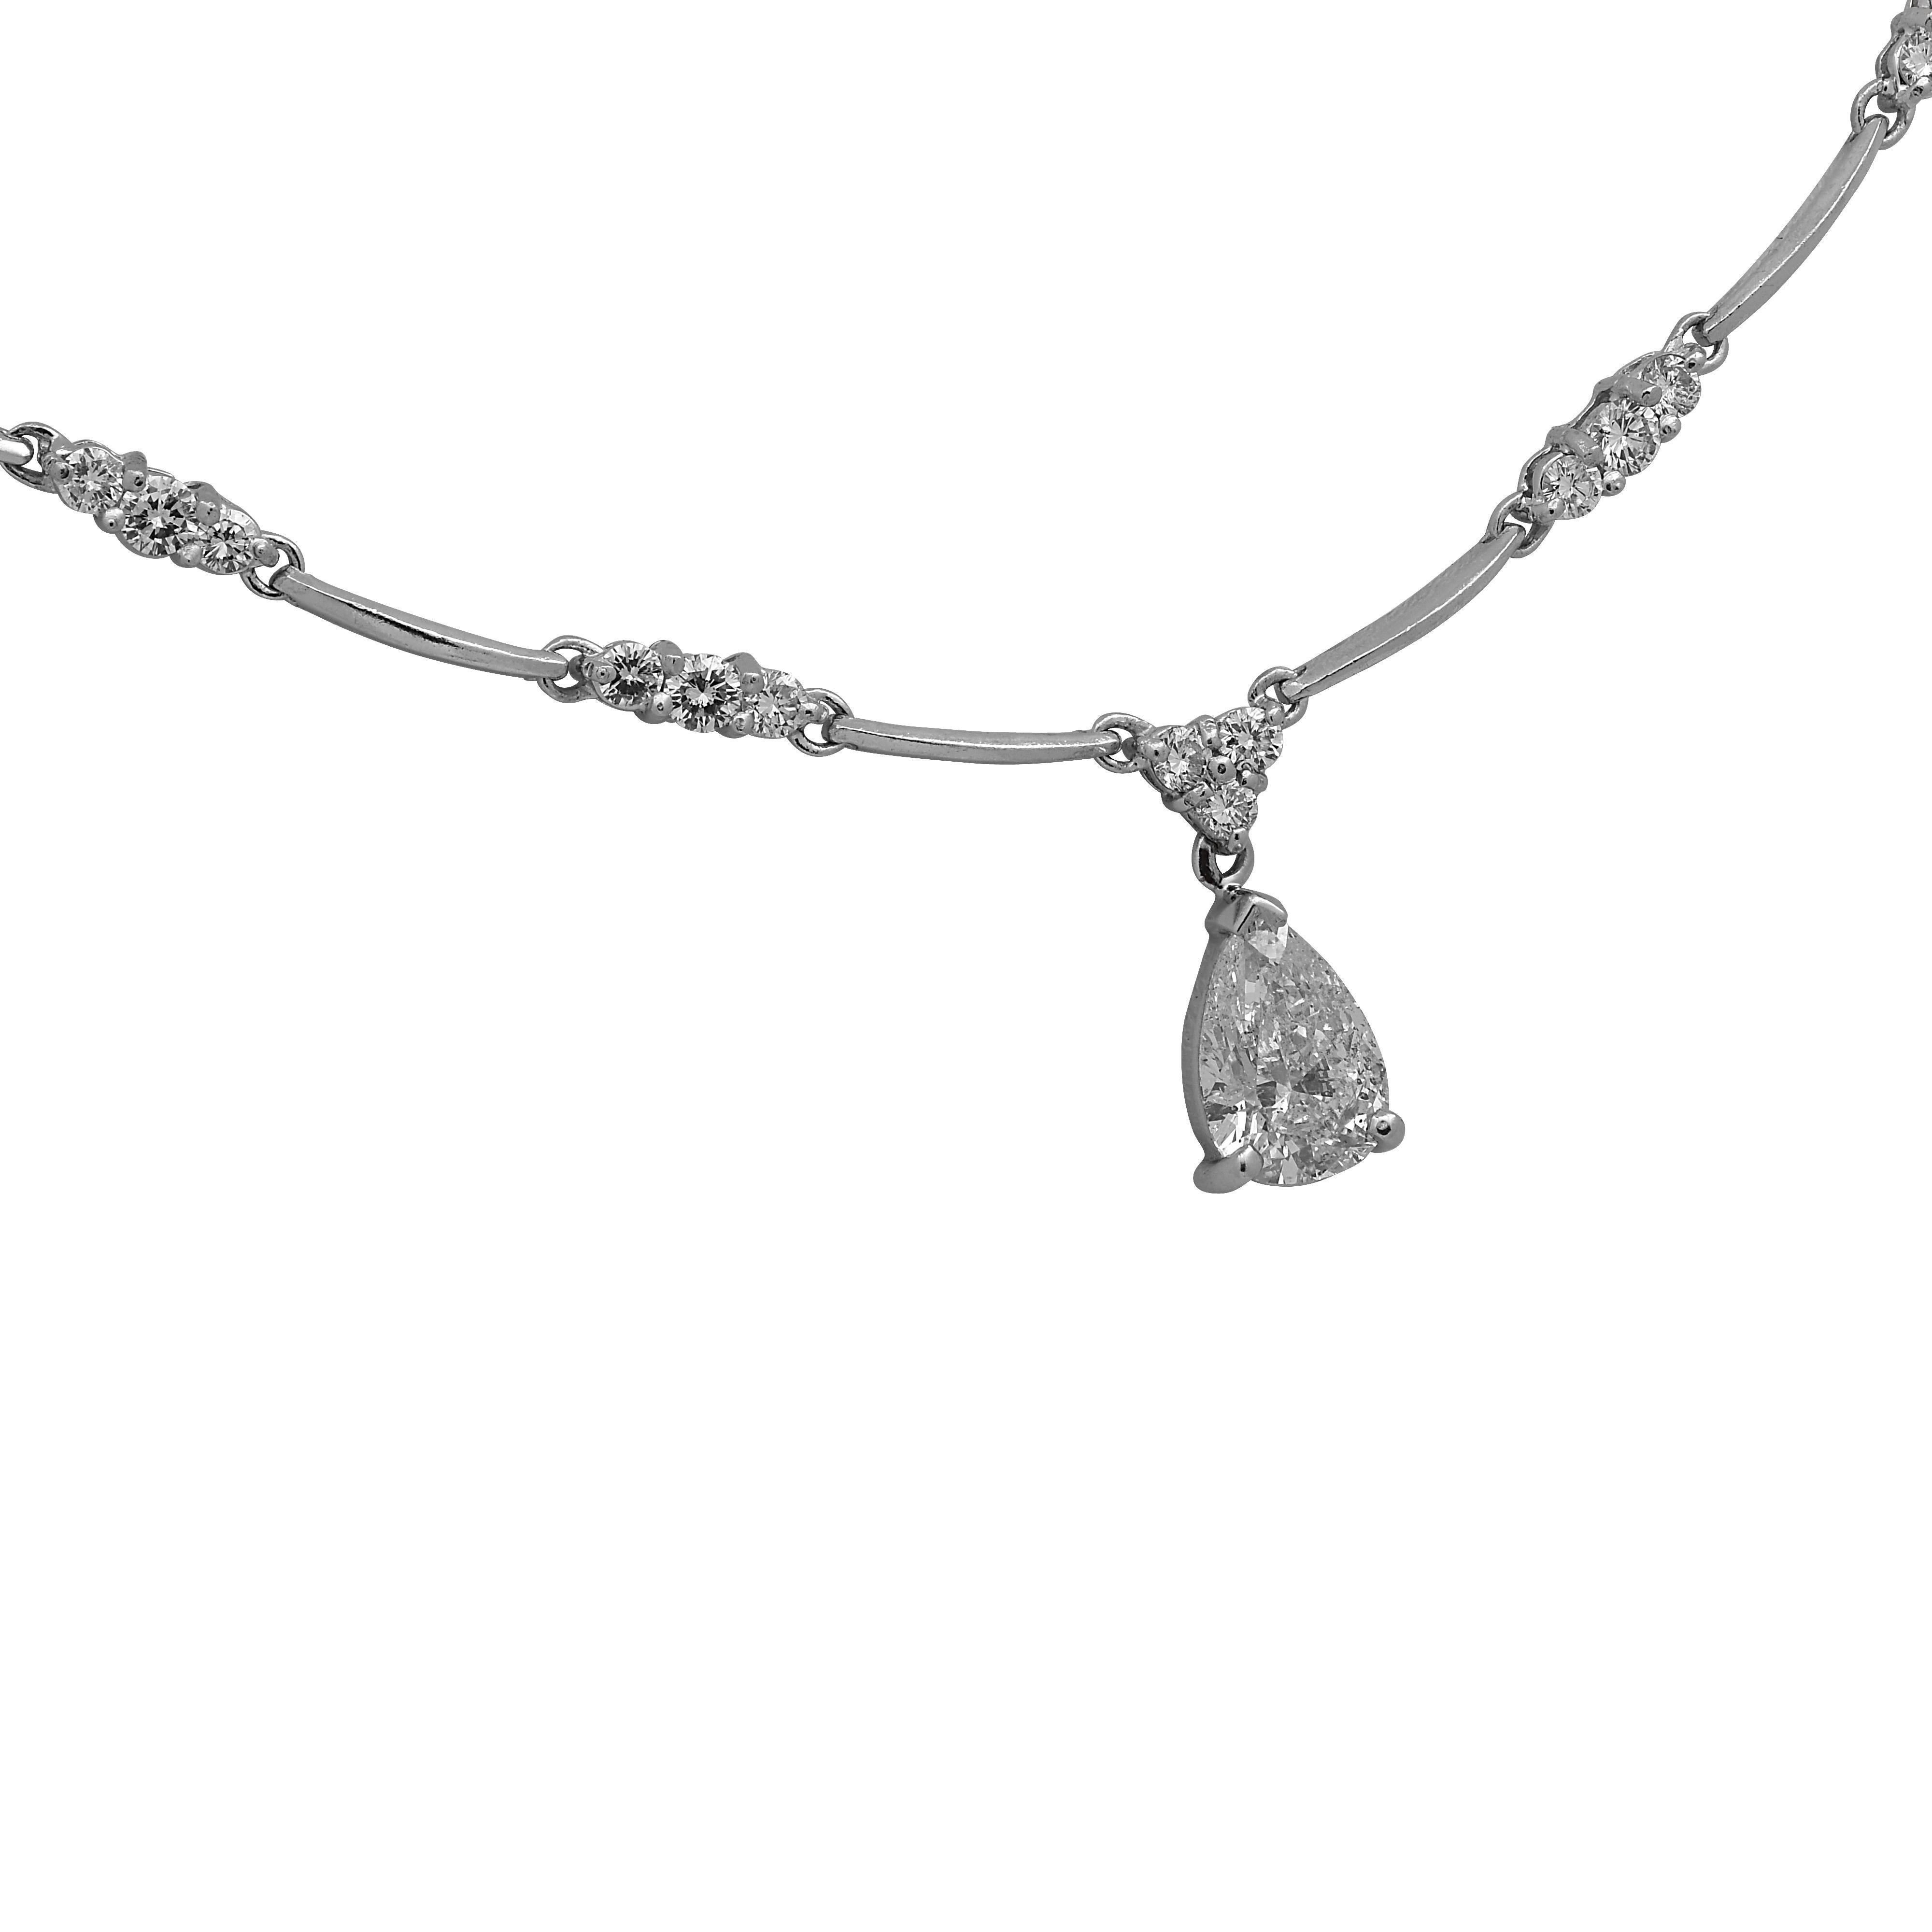 Stunning necklace crafted in 18 karat white gold featuring a pear shape diamond weighing approximately 1.25 carats, G color, SI3 clarity accented by 35 round brilliant cut diamonds weighing approximately 2 carats total, G color VS-SI clarity. The